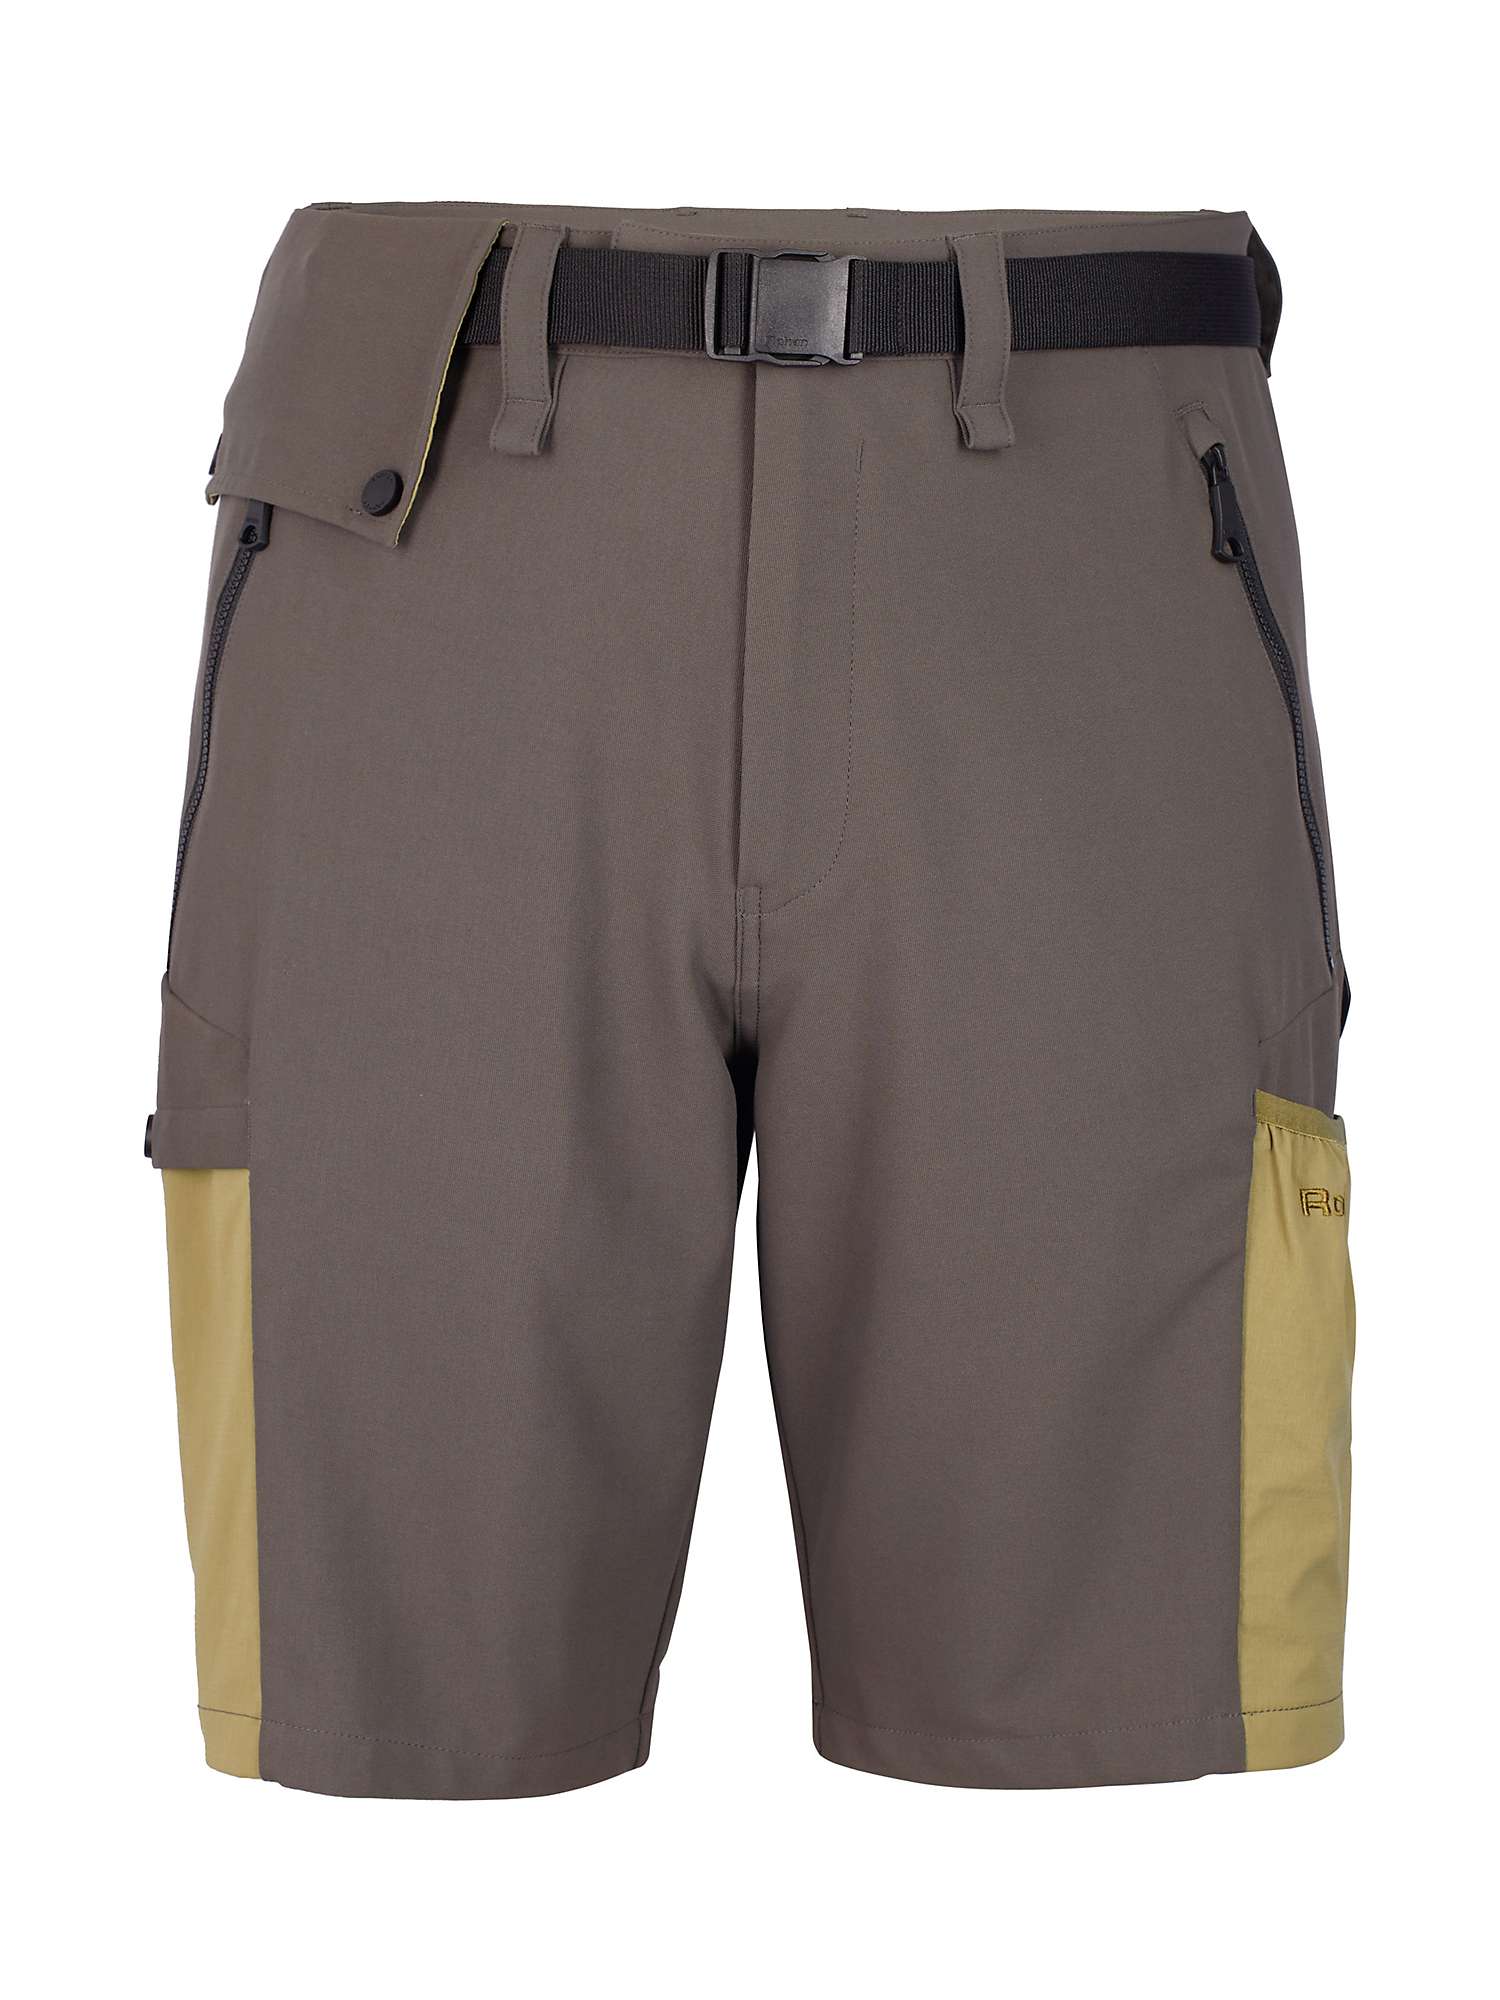 Buy Rohan Explore Practical Cargo Shorts, Olive Online at johnlewis.com